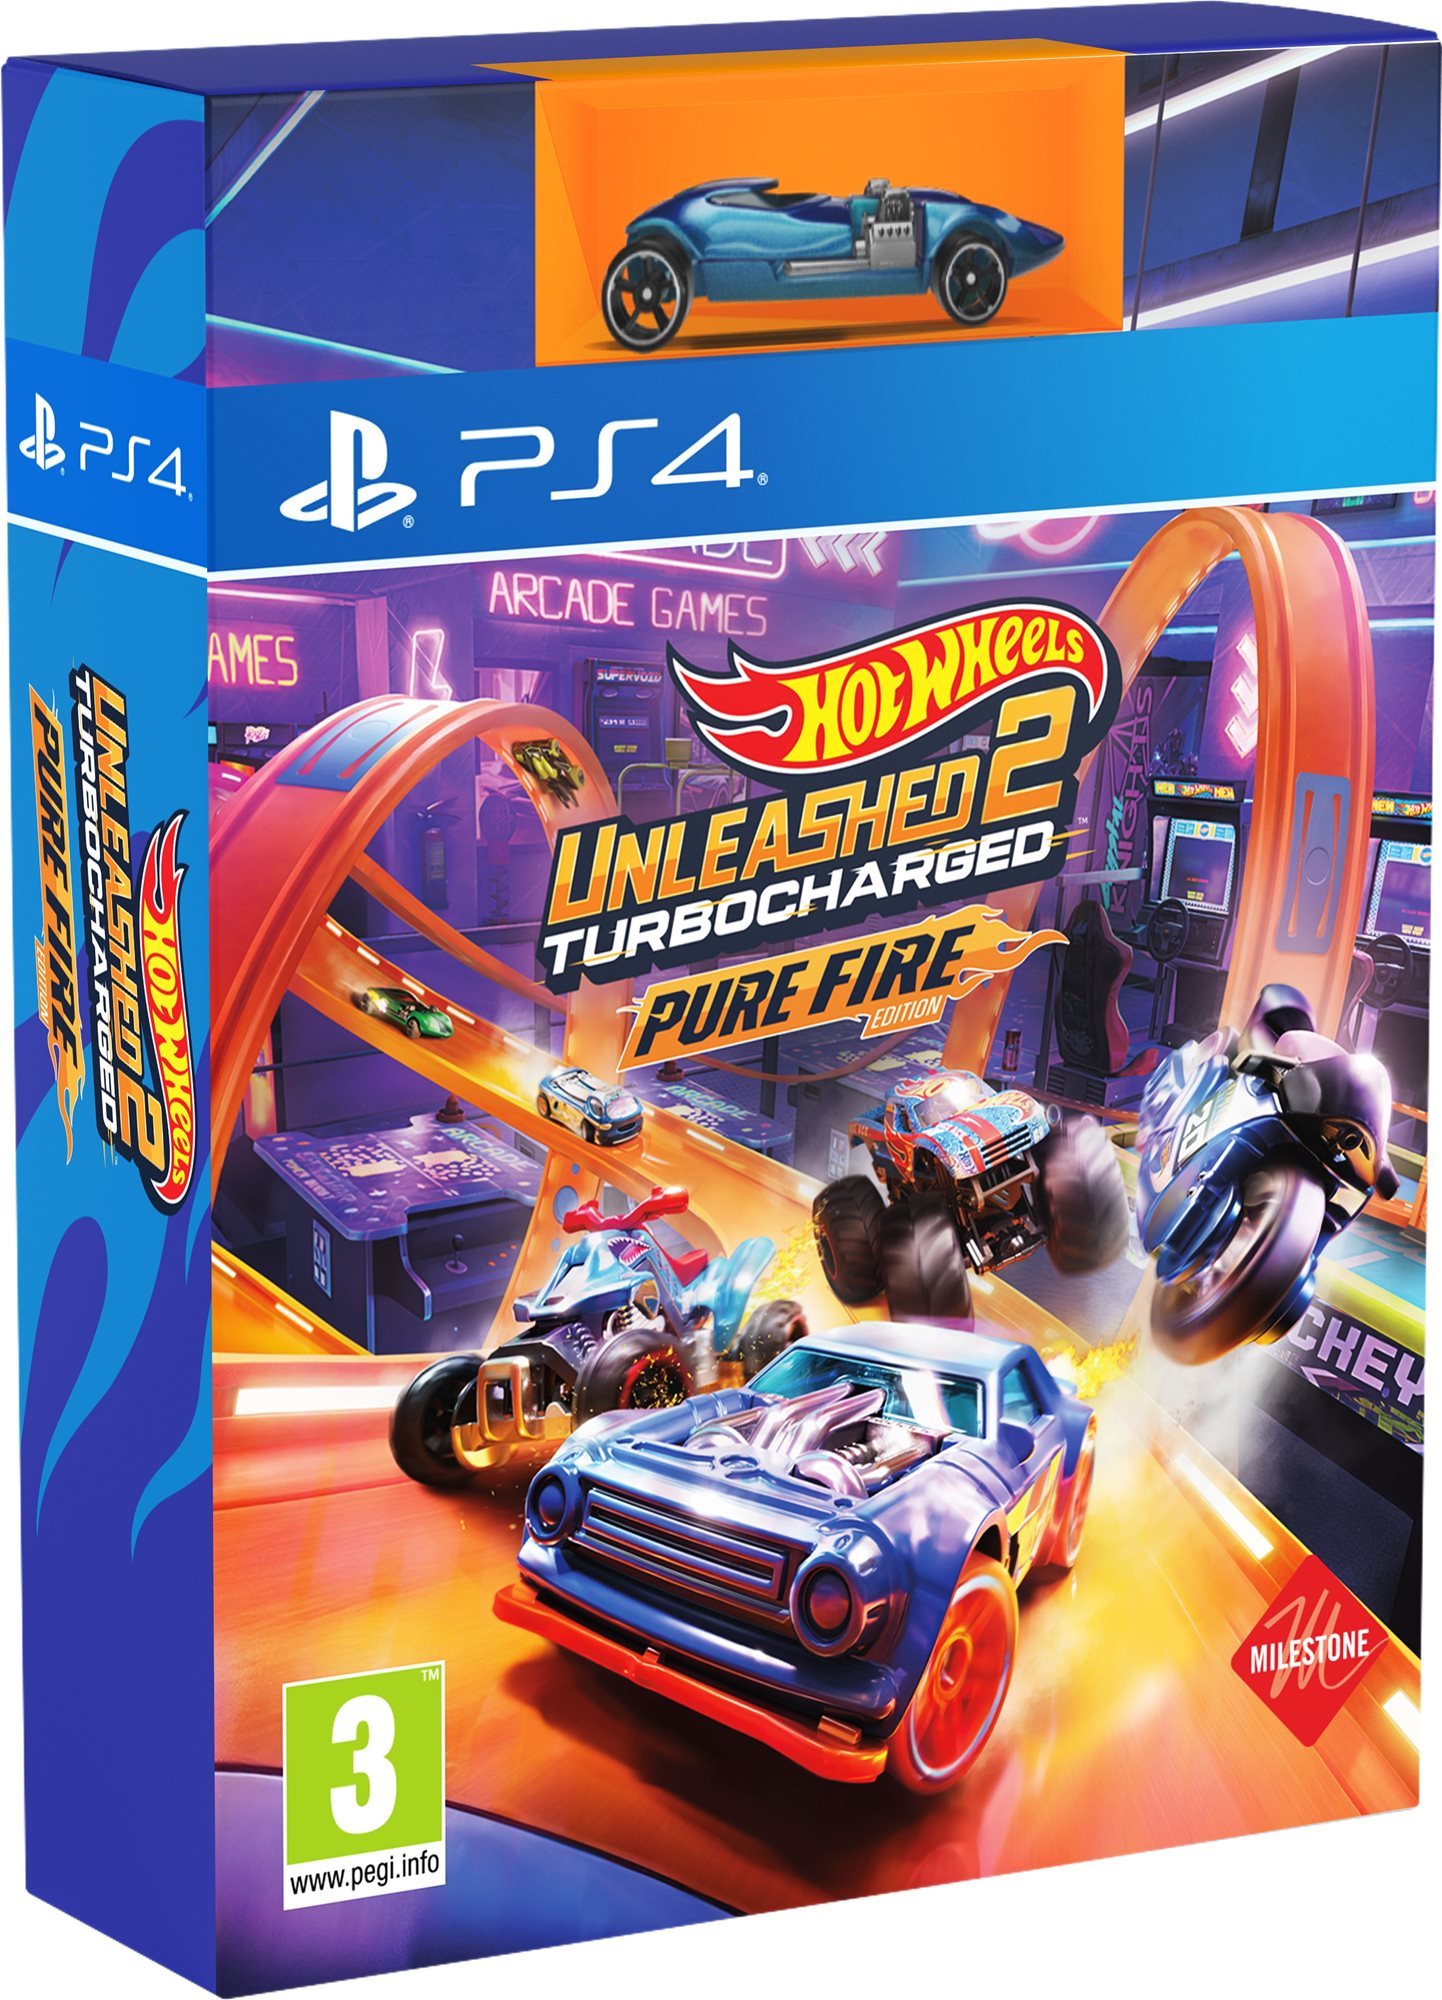 Hot Wheels Unleashed 2: Turbocharged Pure Fire Edition - PS4